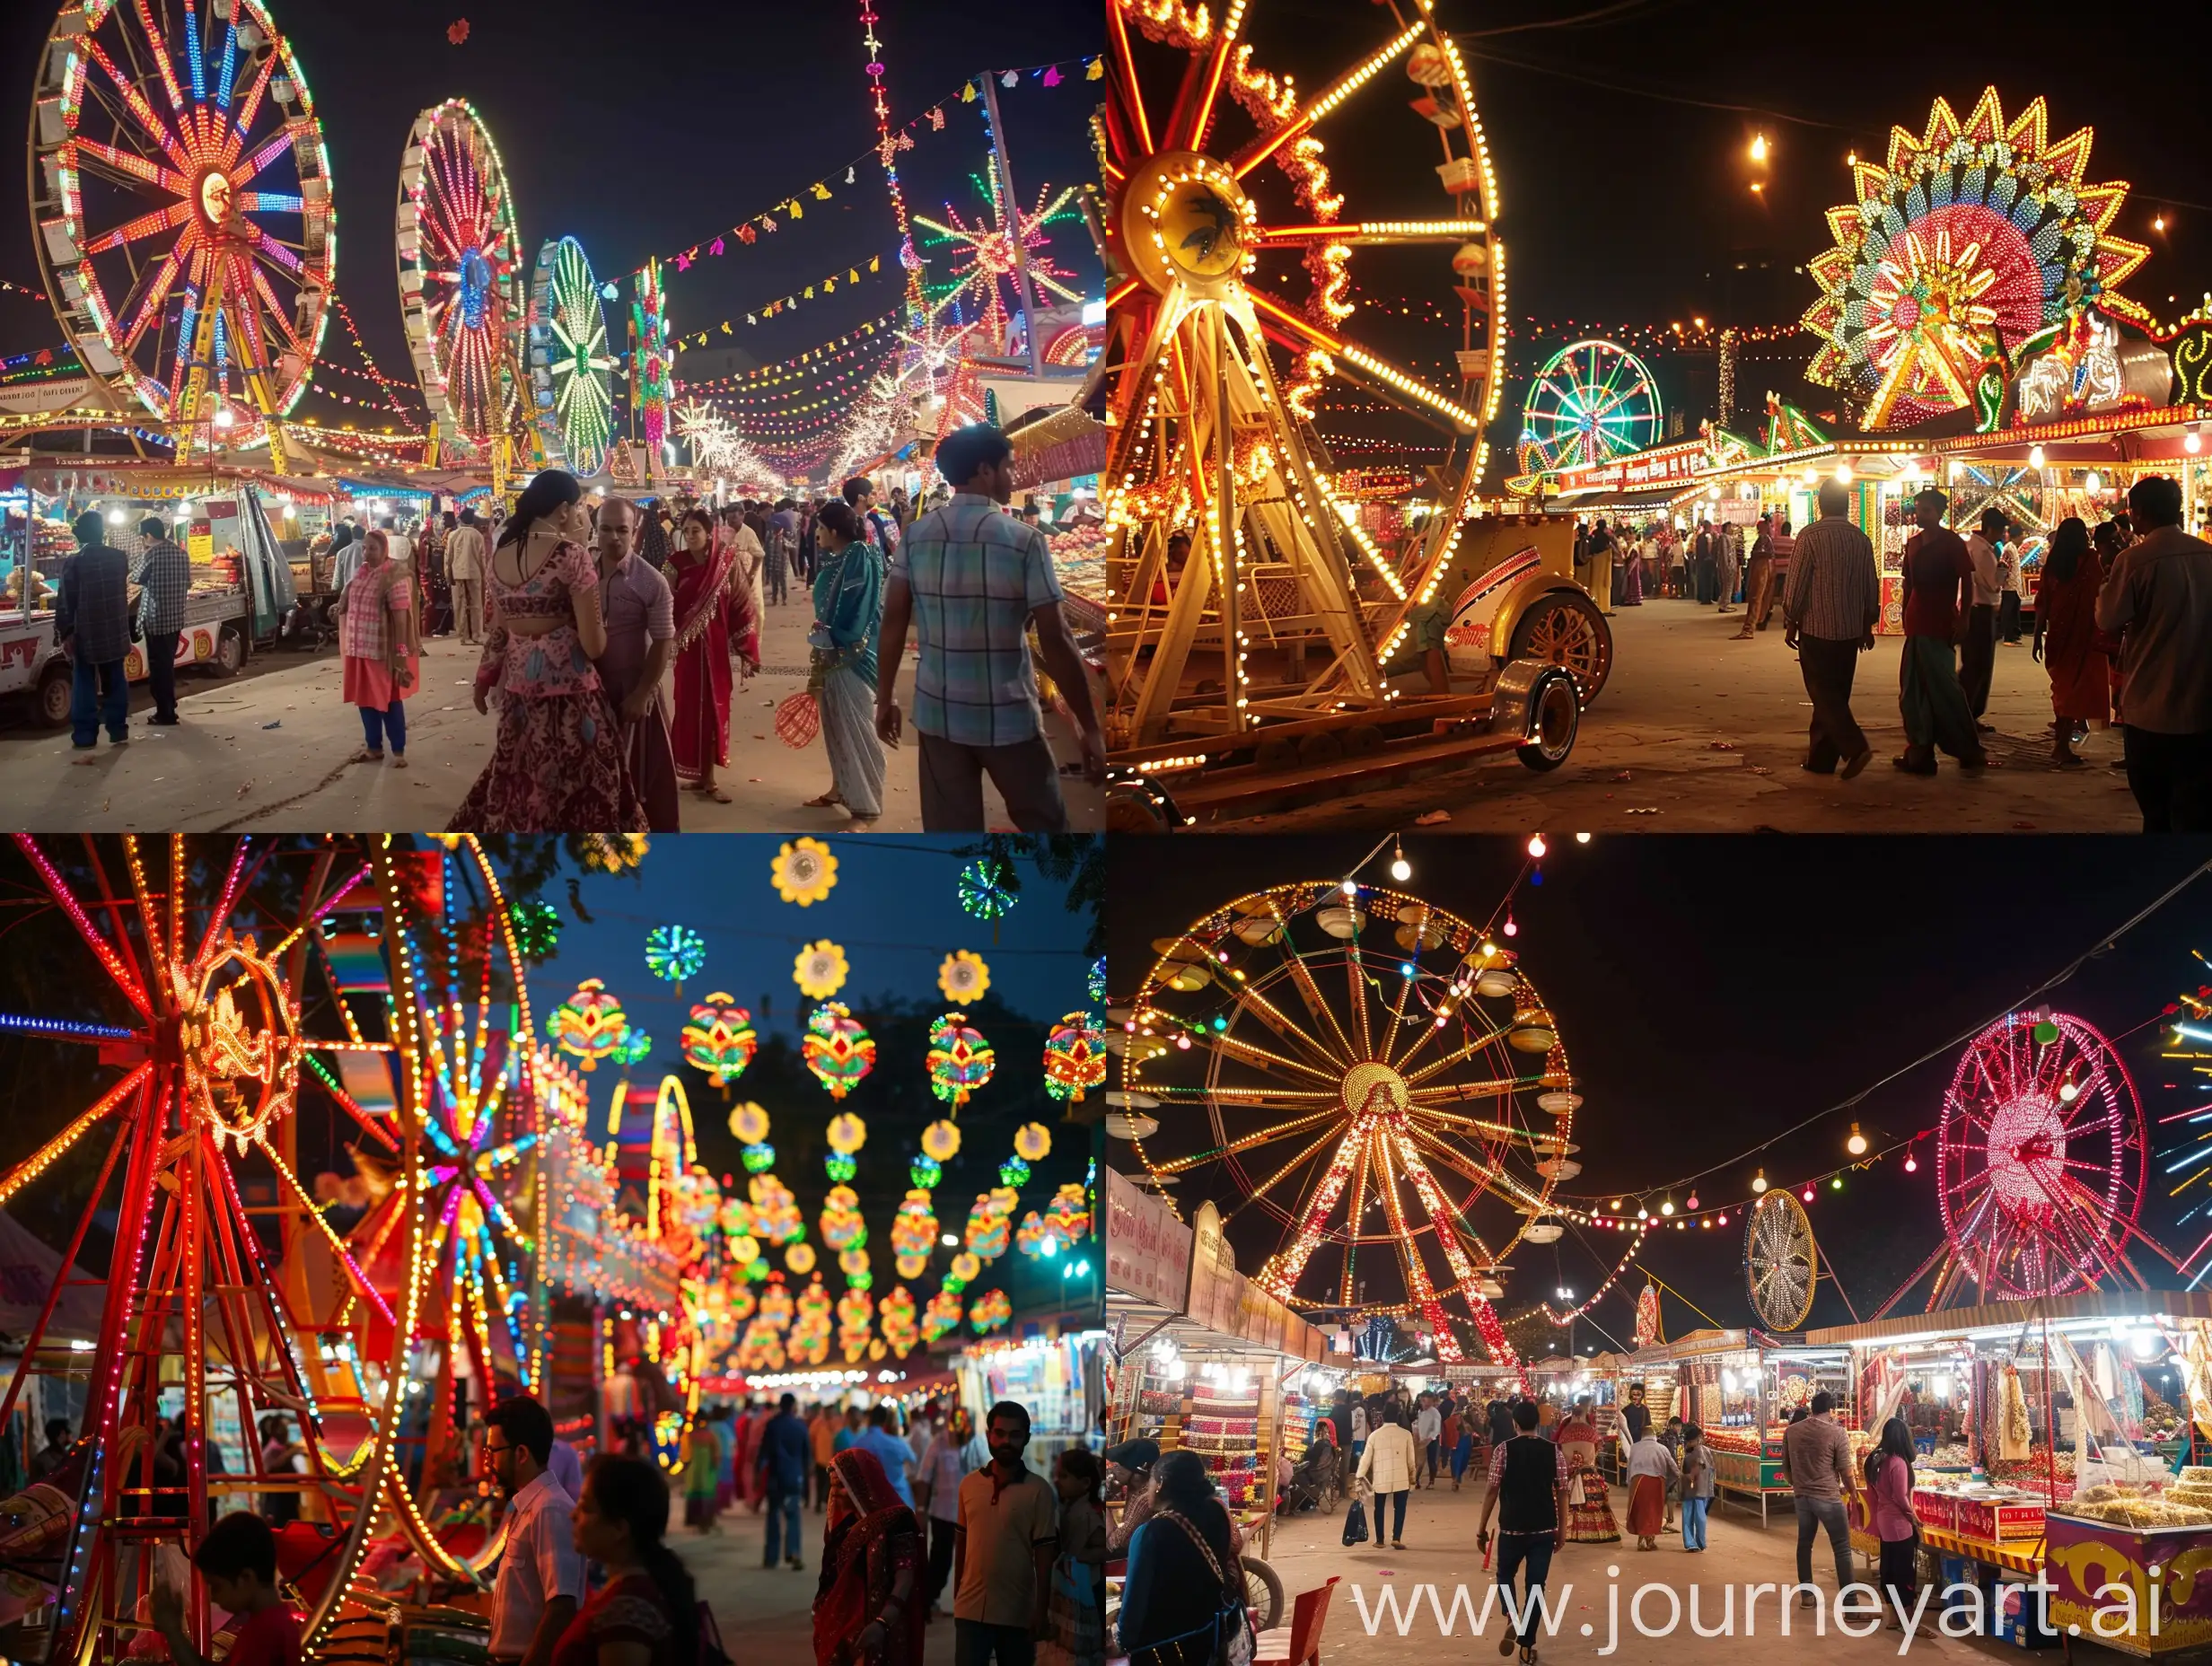 Vibrant-Nighttime-Numaish-Exhibition-in-Hyderabad-with-Giant-Wheels-Food-and-Shopping-Delights